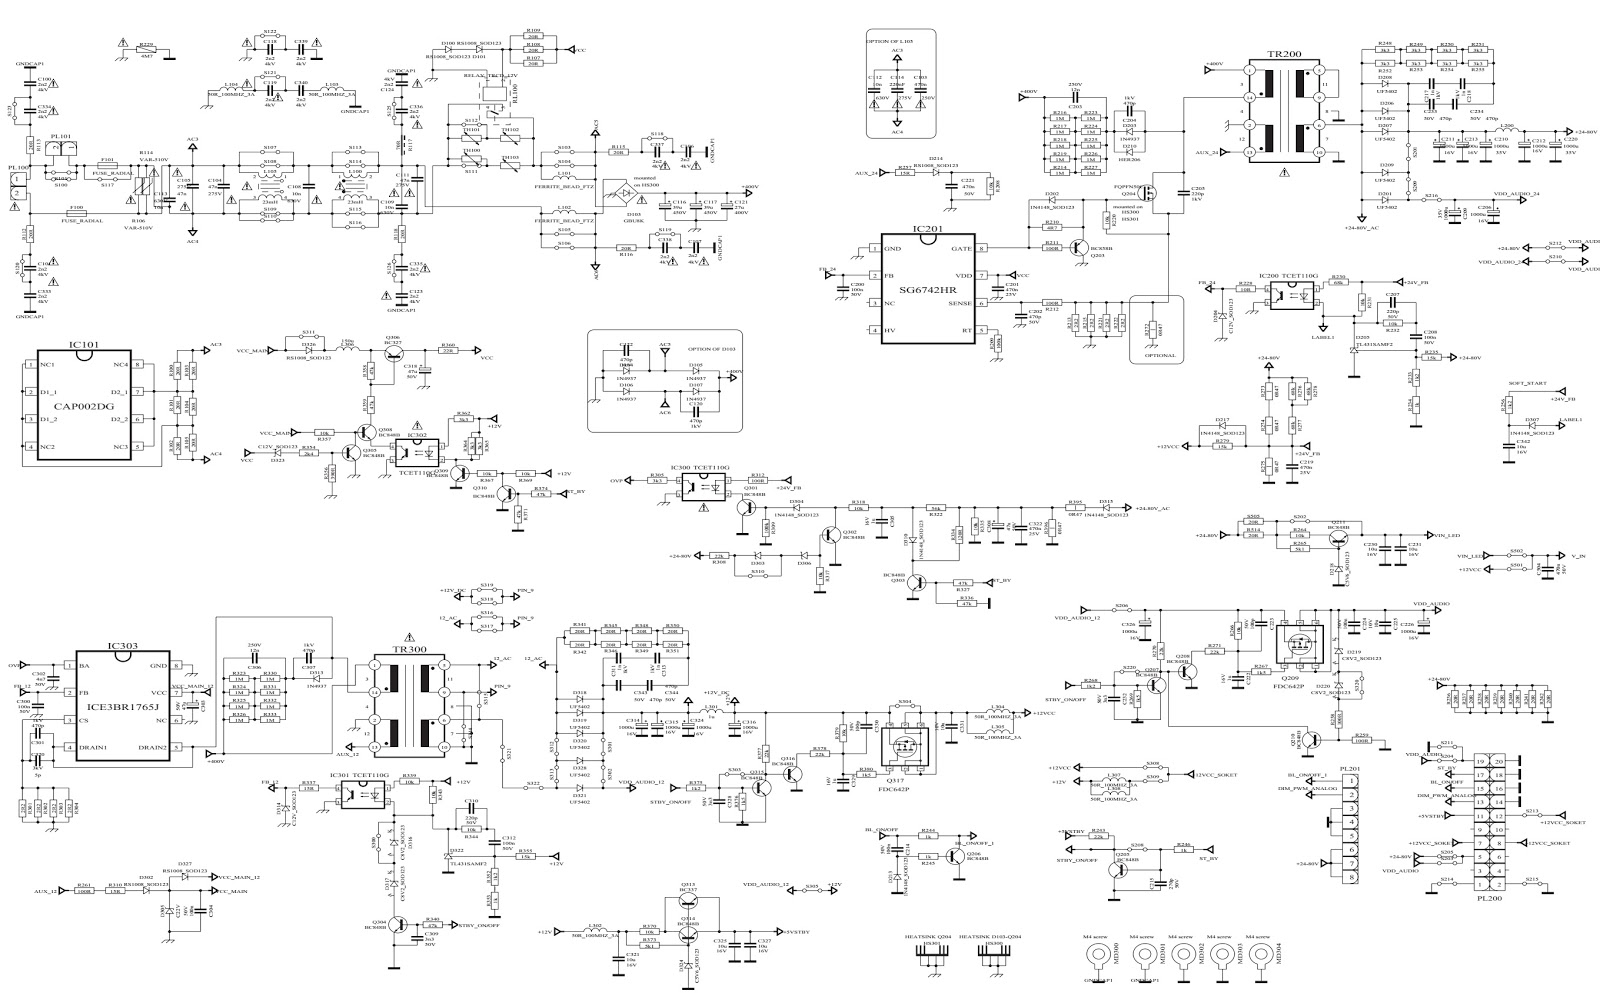 Electro help: Sharp LED TV-LC-32LD145, LC-39LD145 – SMPS schematic, How